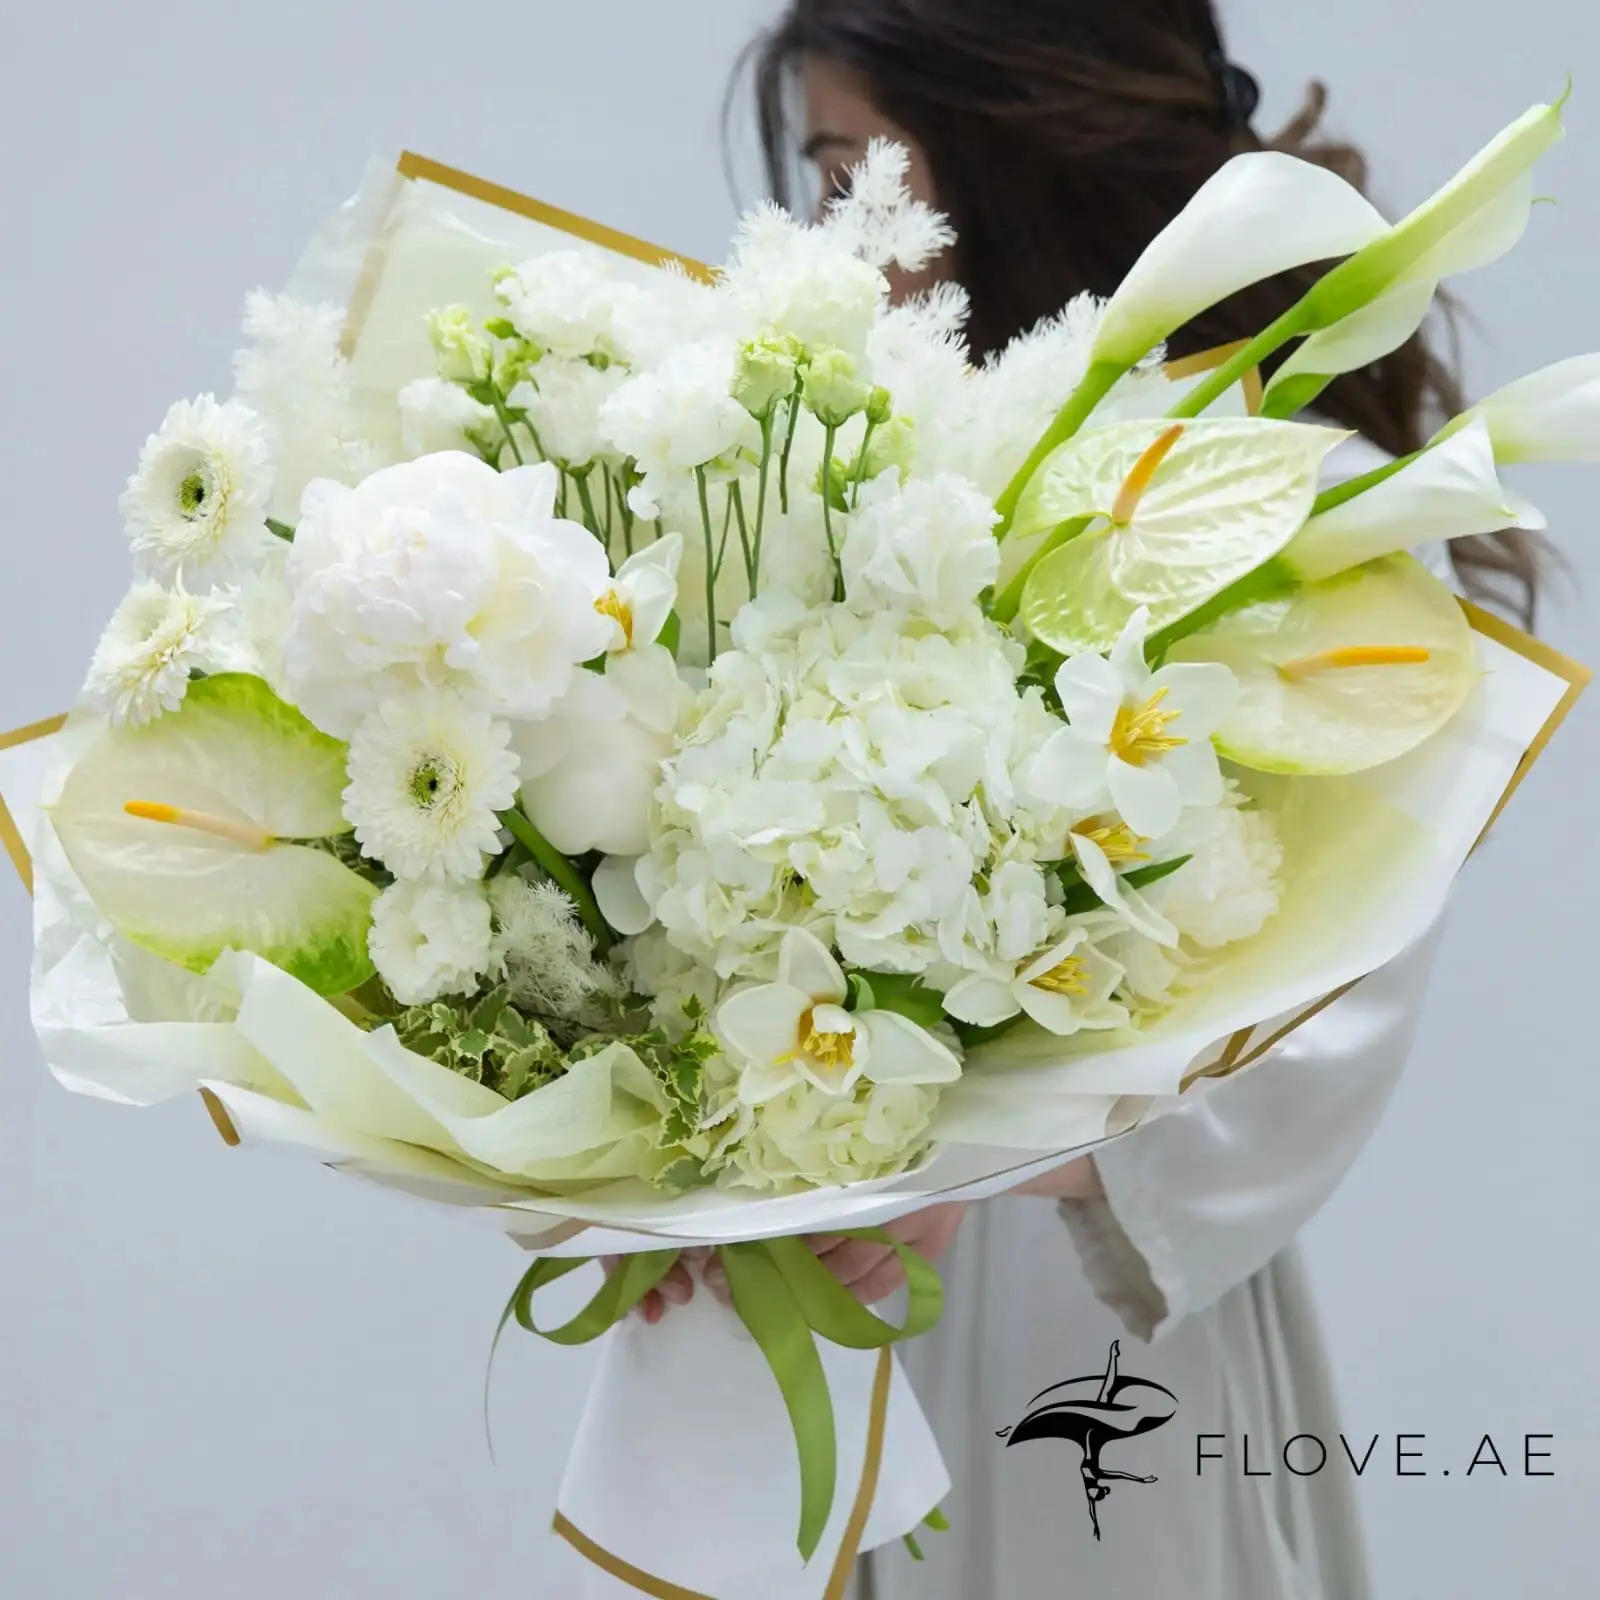 Classic: how to surprise your loved one with a bouquet without understanding trends